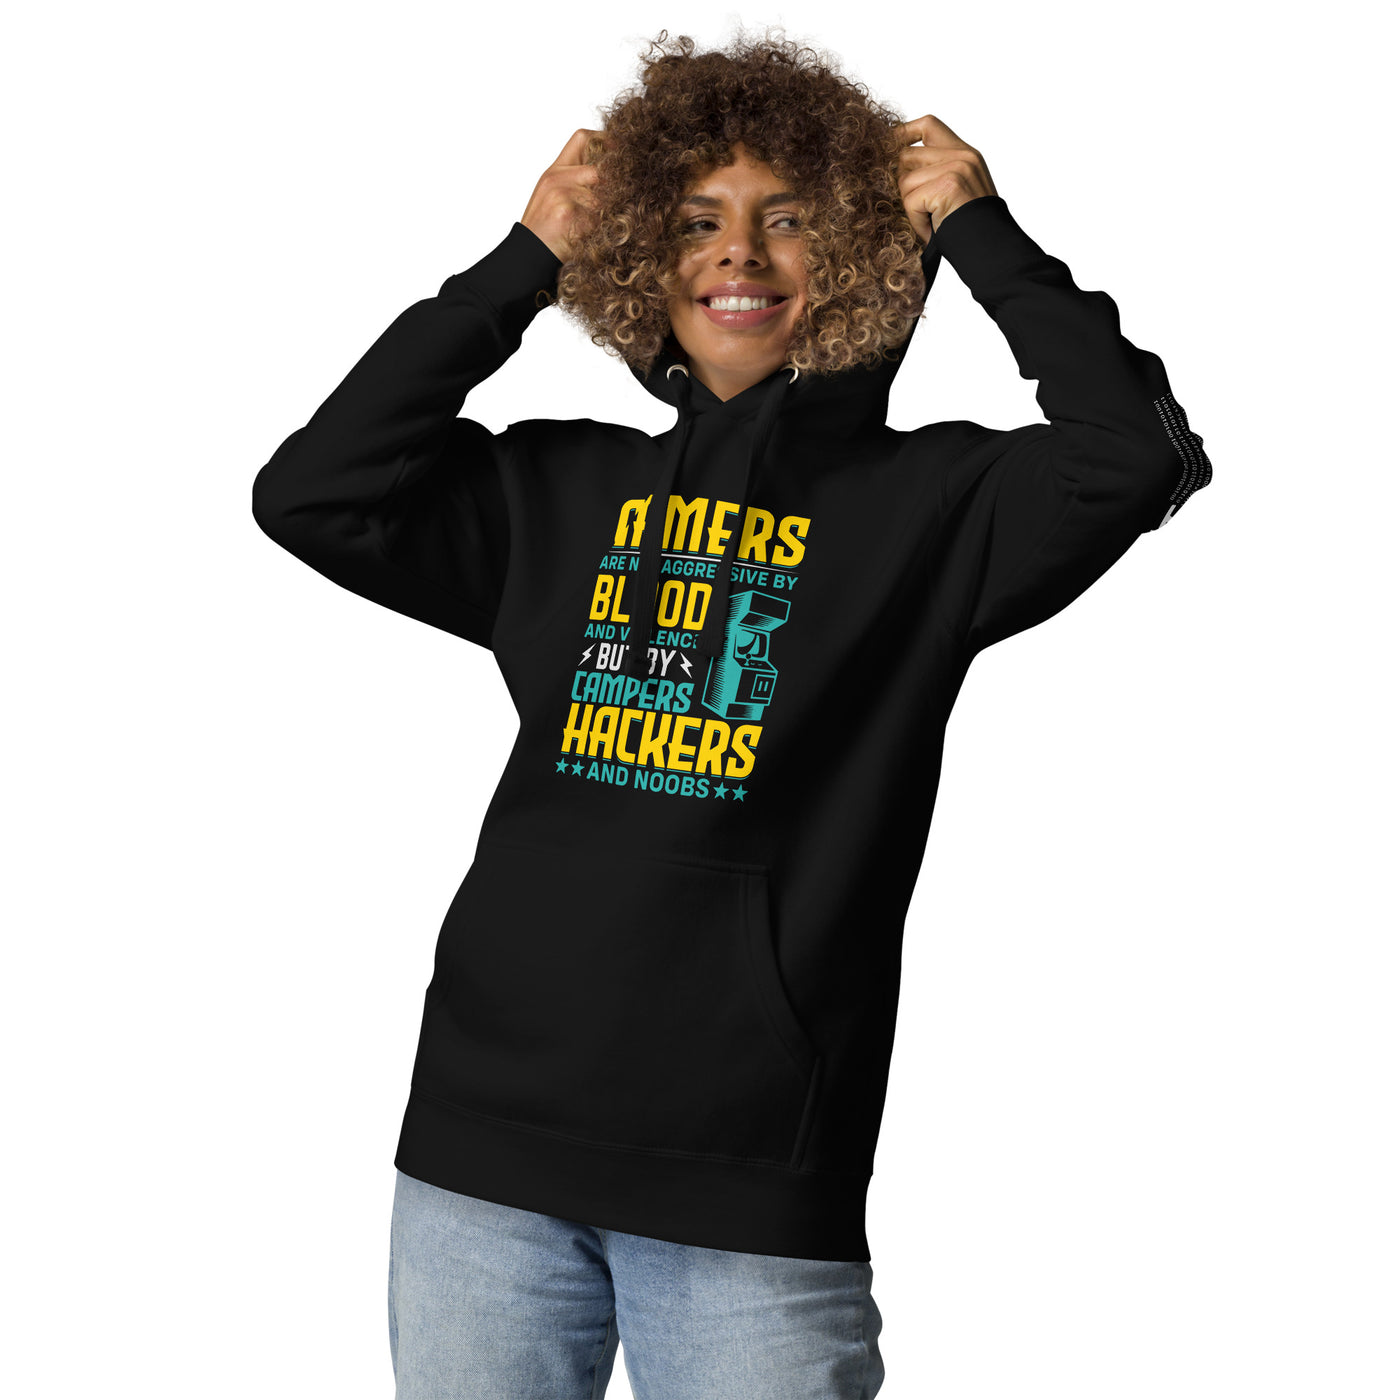 Gamers are not Aggressive by Blood and Violence ( rasel ) - Unisex Hoodie